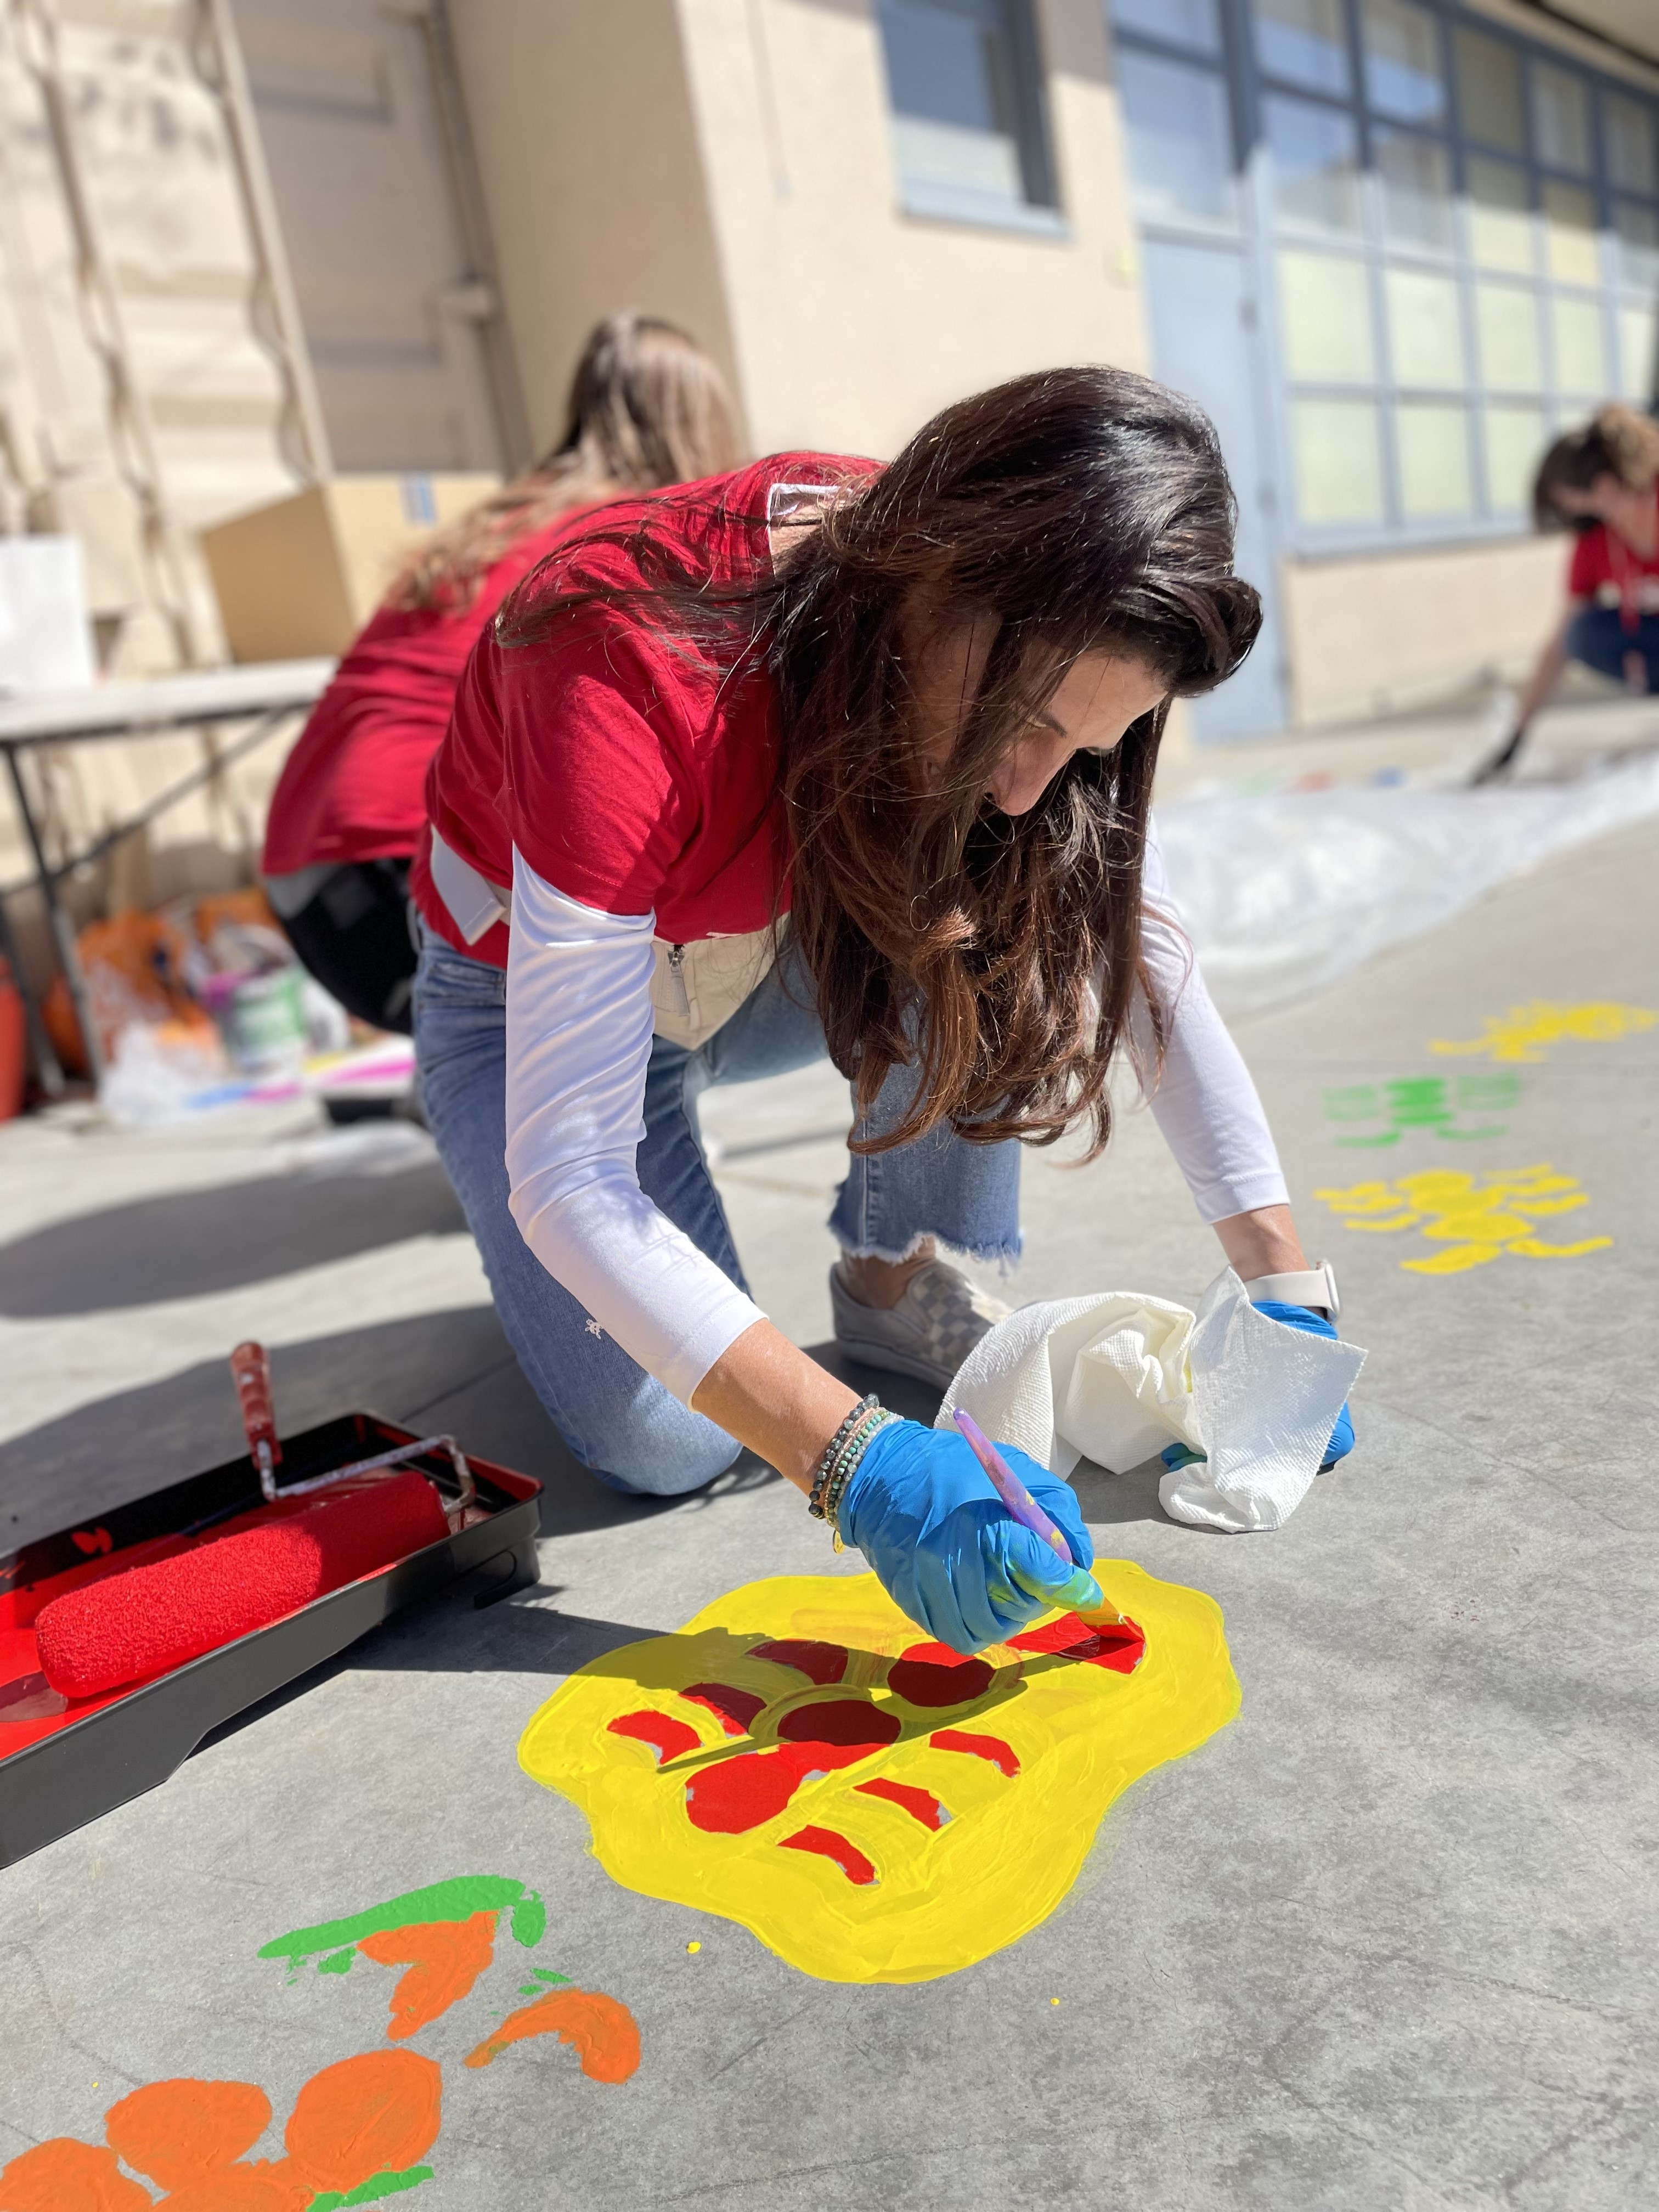 Volunteers paint a colorful agility course on the kinder playground.